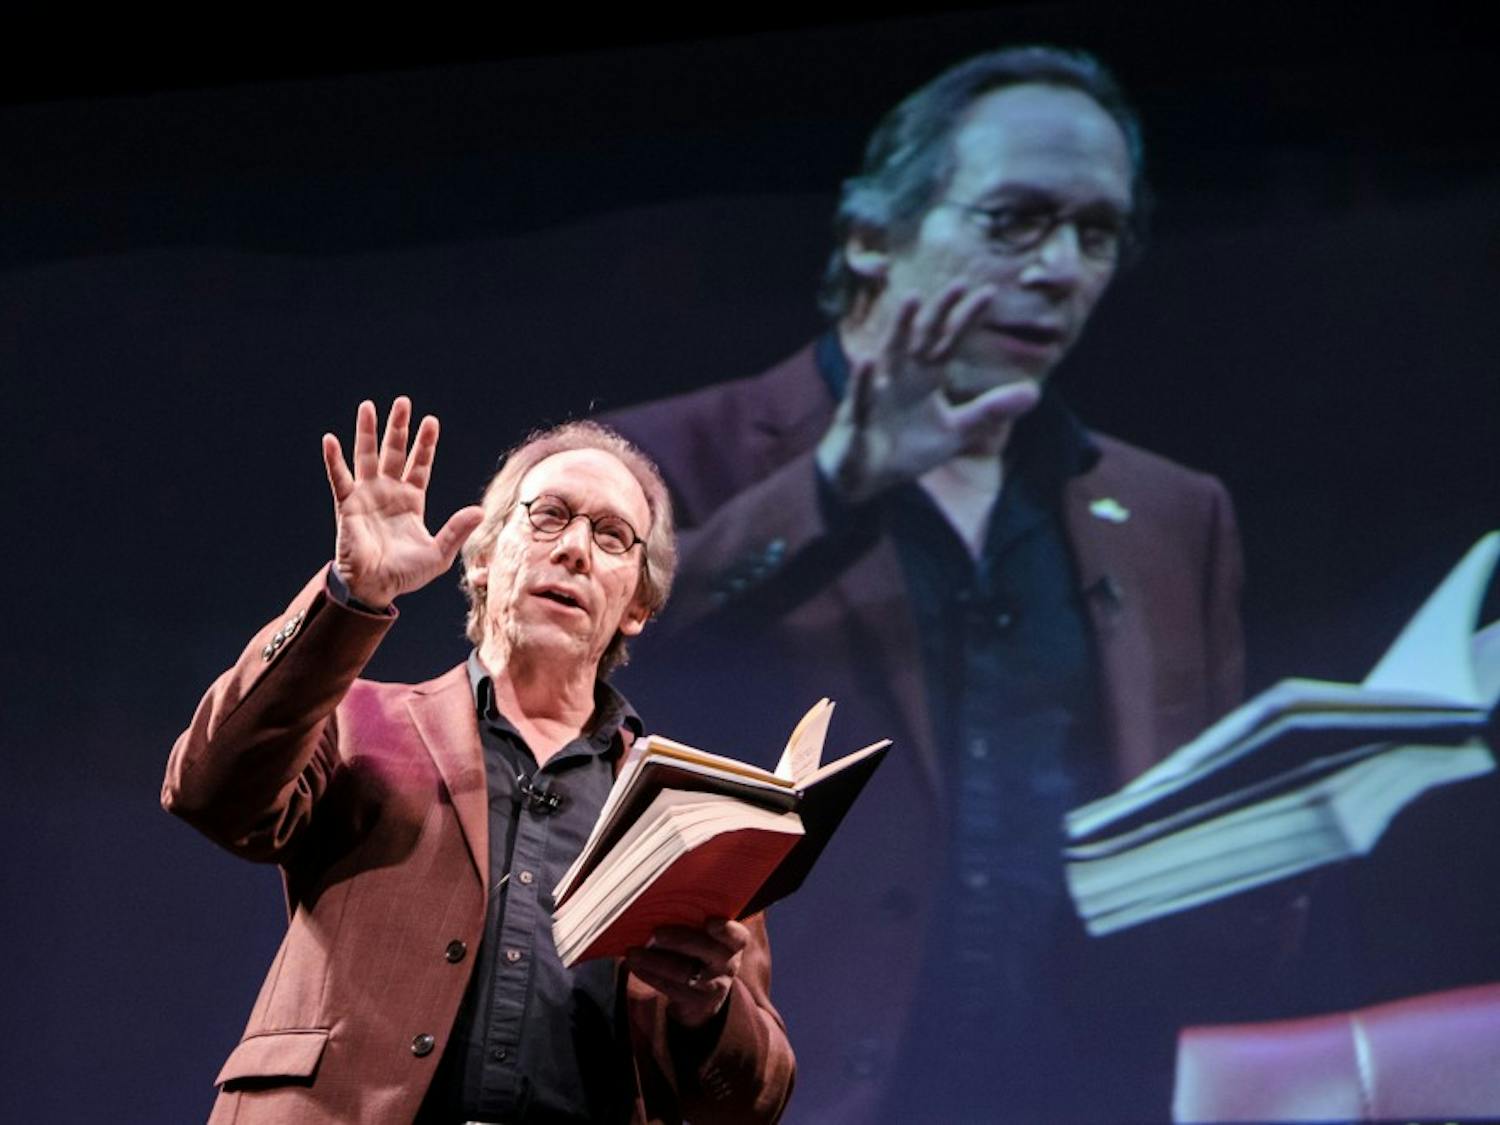 Lawrence Krauss, founder of the ASU School of Earth and Space Exploration, speaks at an Origin Projects event at the Orpheum Theater on Oct. 19, 2016. The ASU Origins Projects brings together experts to publicly discuss a wide range of cultural and scientific topics.